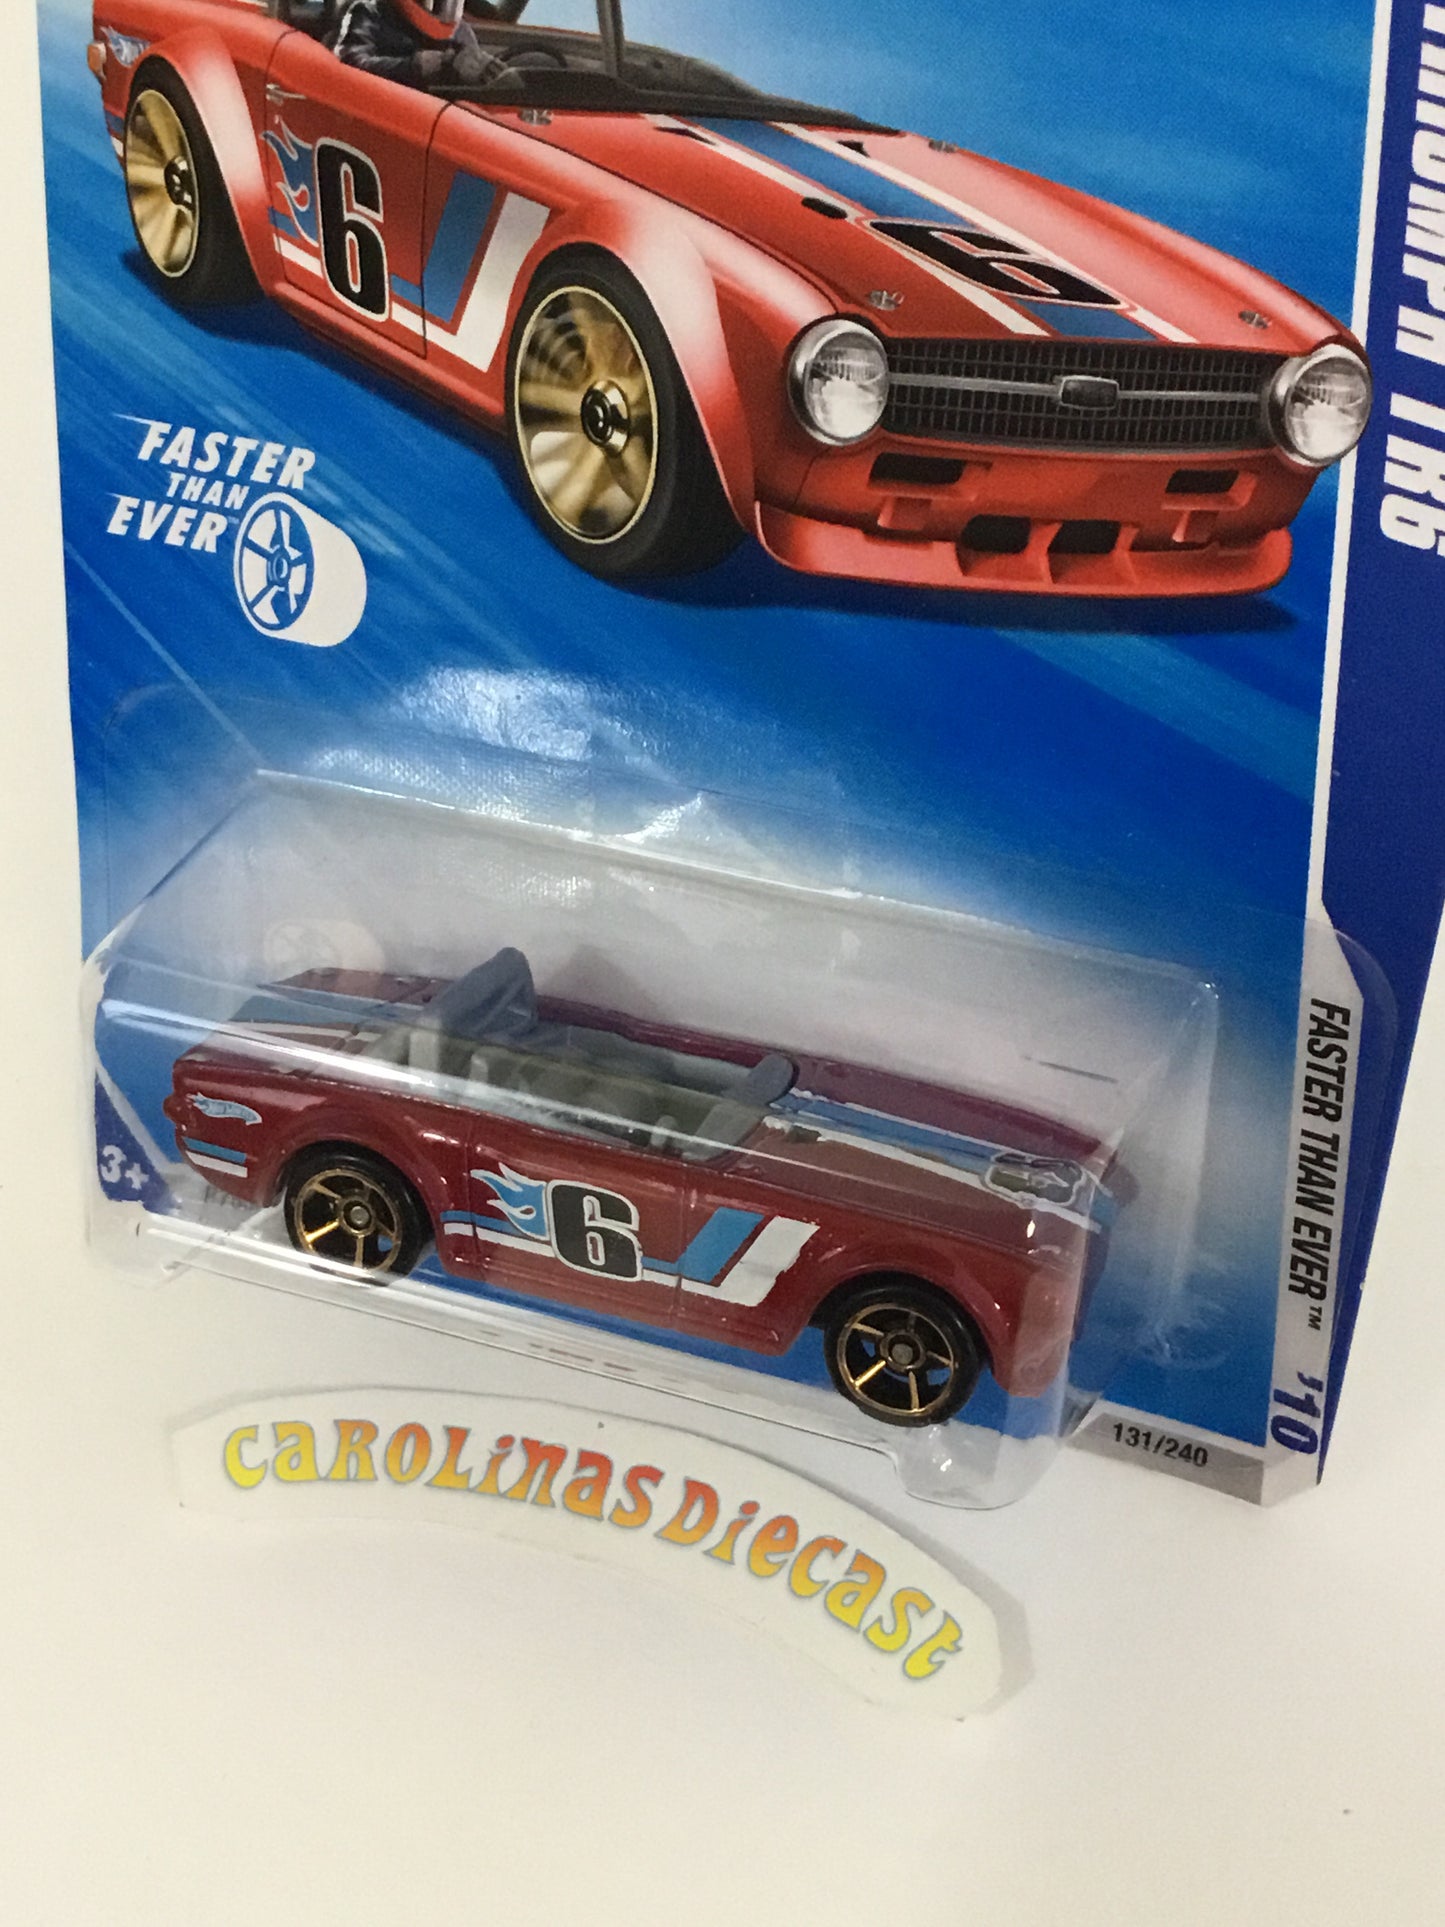 2010 Hot Wheels #131 Triumph TR6 red fte faster than ever